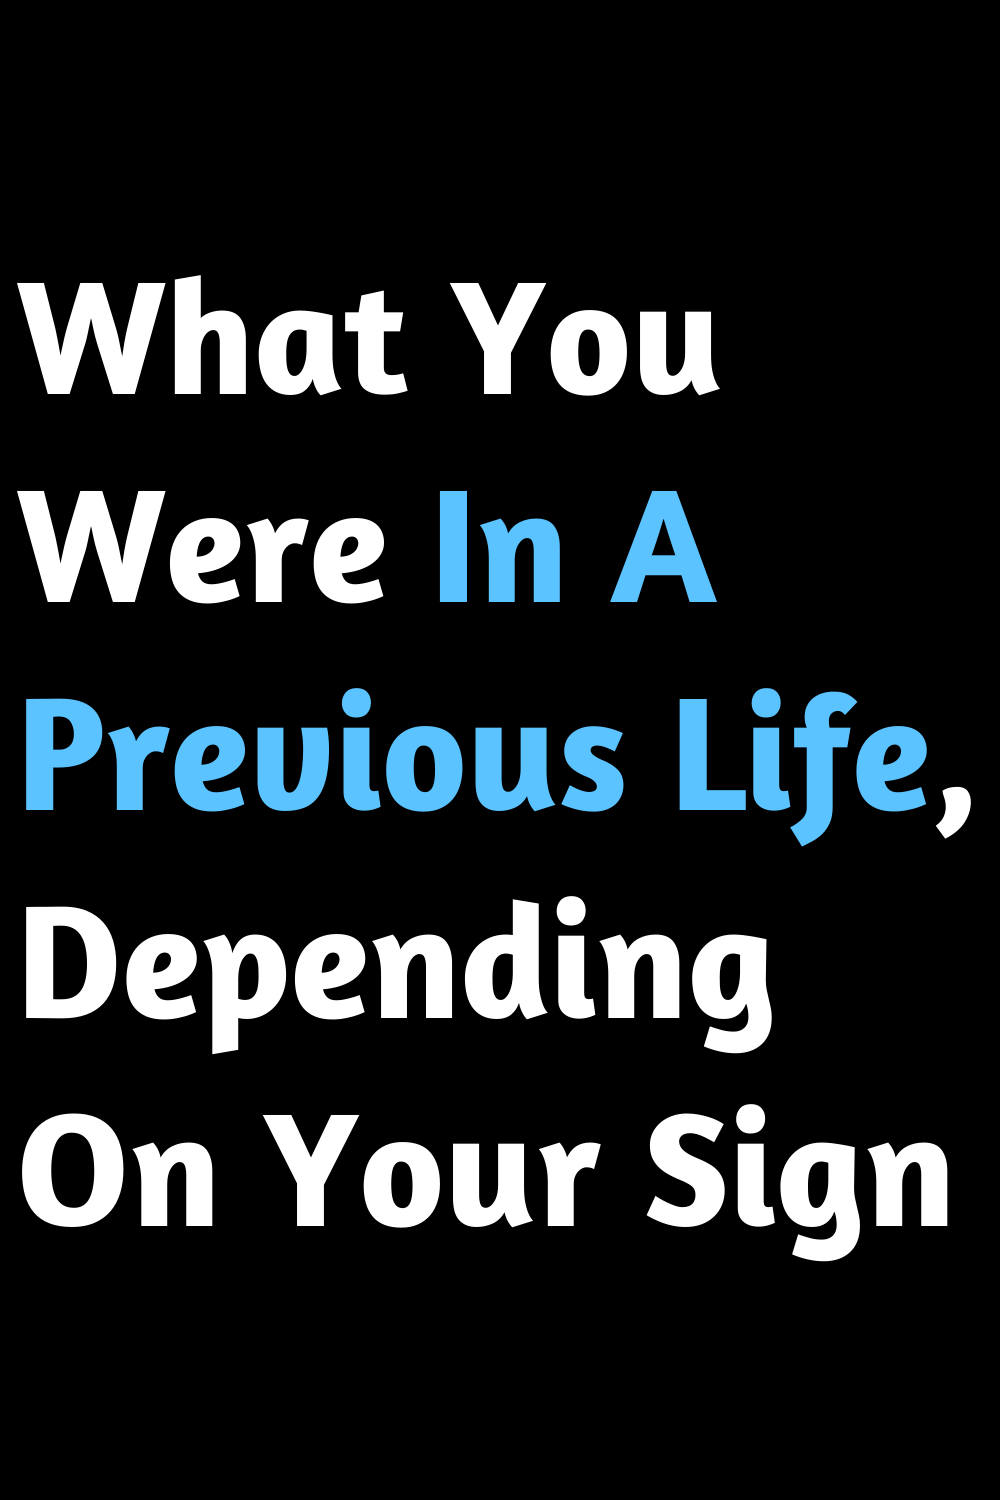 What You Were In A Previous Life, Depending On Your Sign